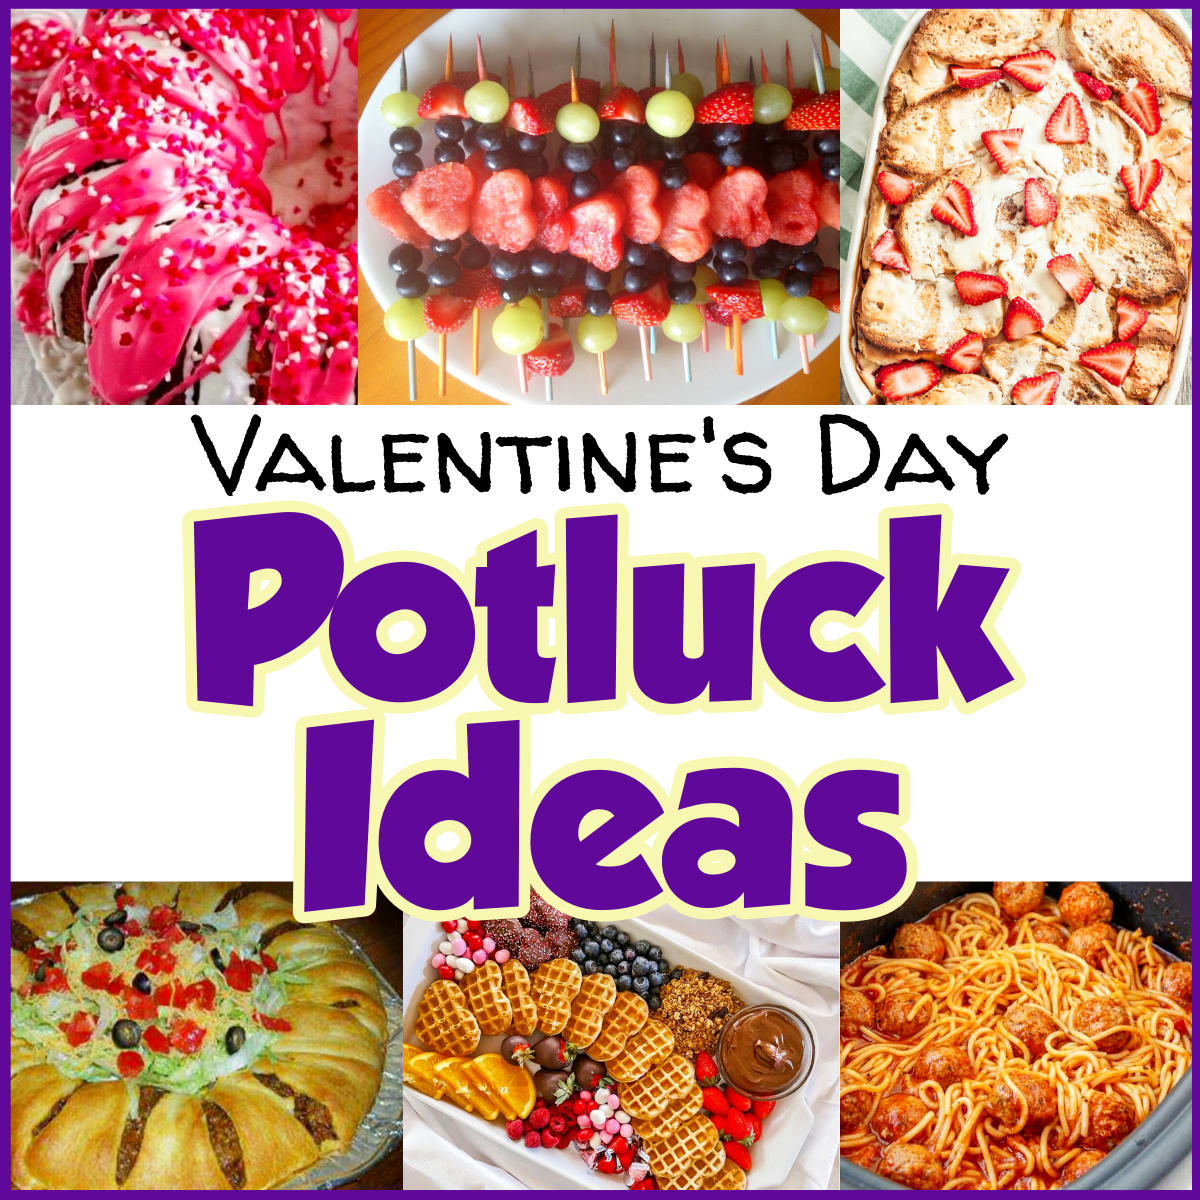 Valentine Potluck Ideas for Work or any Potluck Party Crowd on Valentine's Day. Main dishes, covered dishes, breakfast potluck and potluck desserts for your Potluck planning sign up sheet